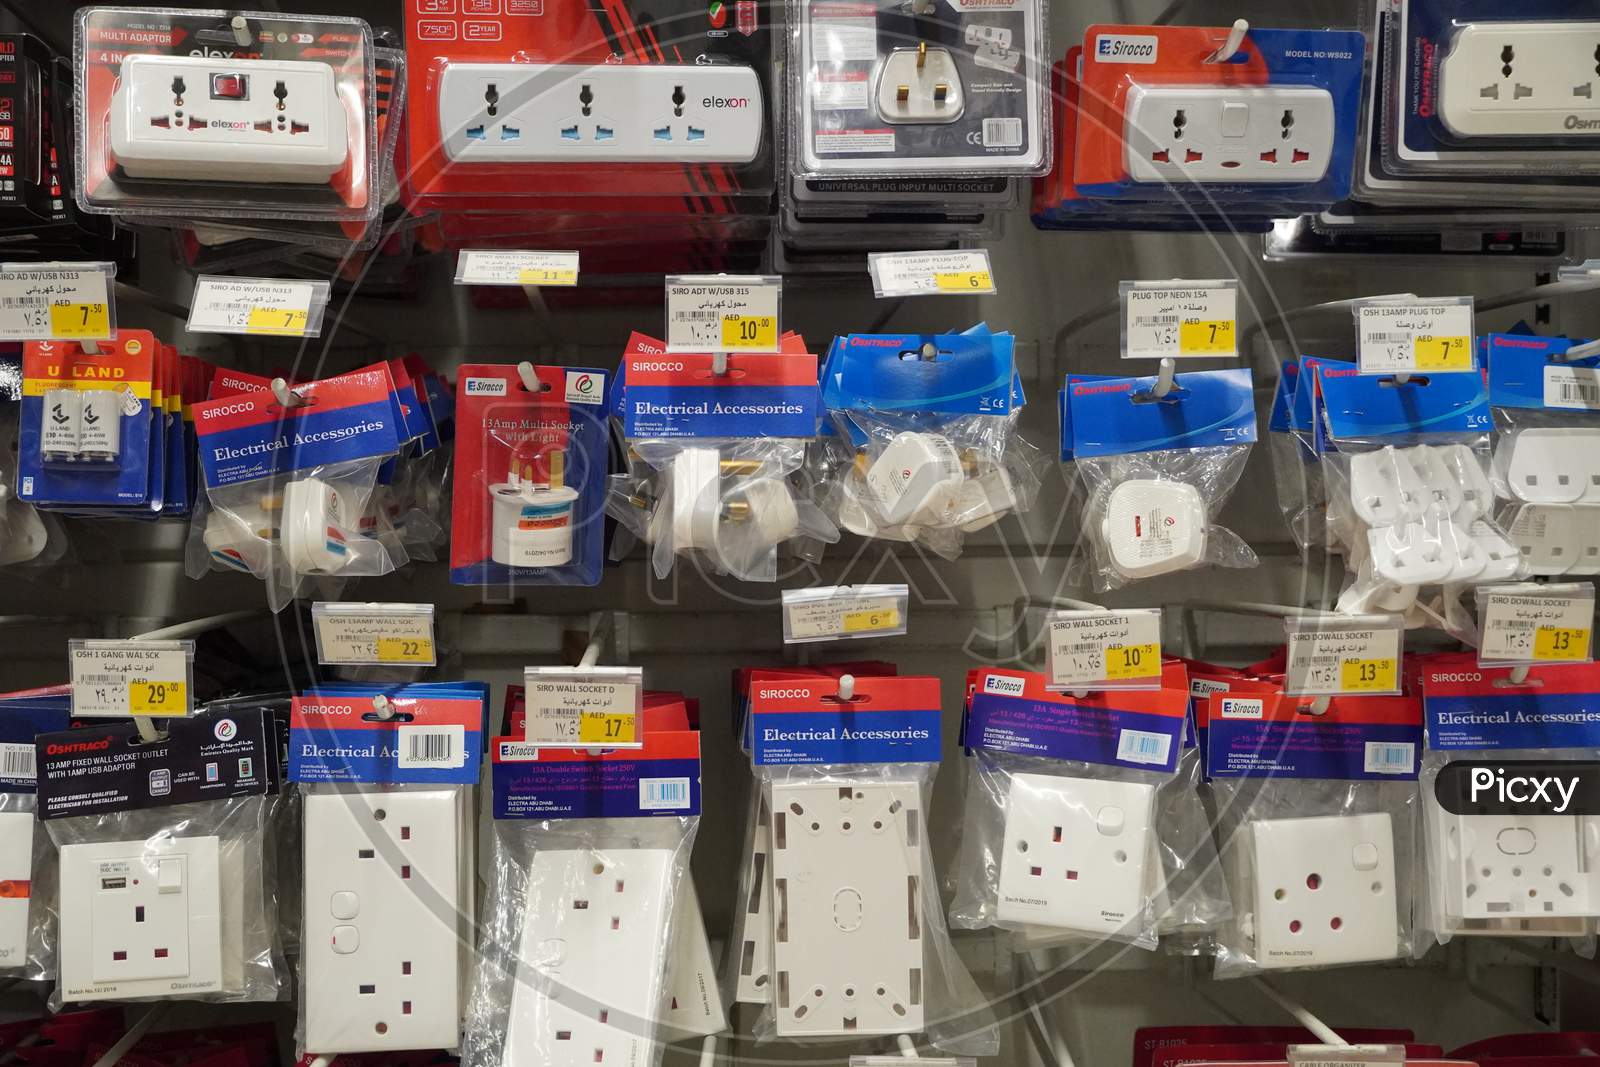 Selection Of Extension 3 Pin Plug Socket Wire On Supermarket. Many Adapter Power Plug Or Extension Cord Hang On The Shelf. Packed Ready Different Kinds Of Power Strips.